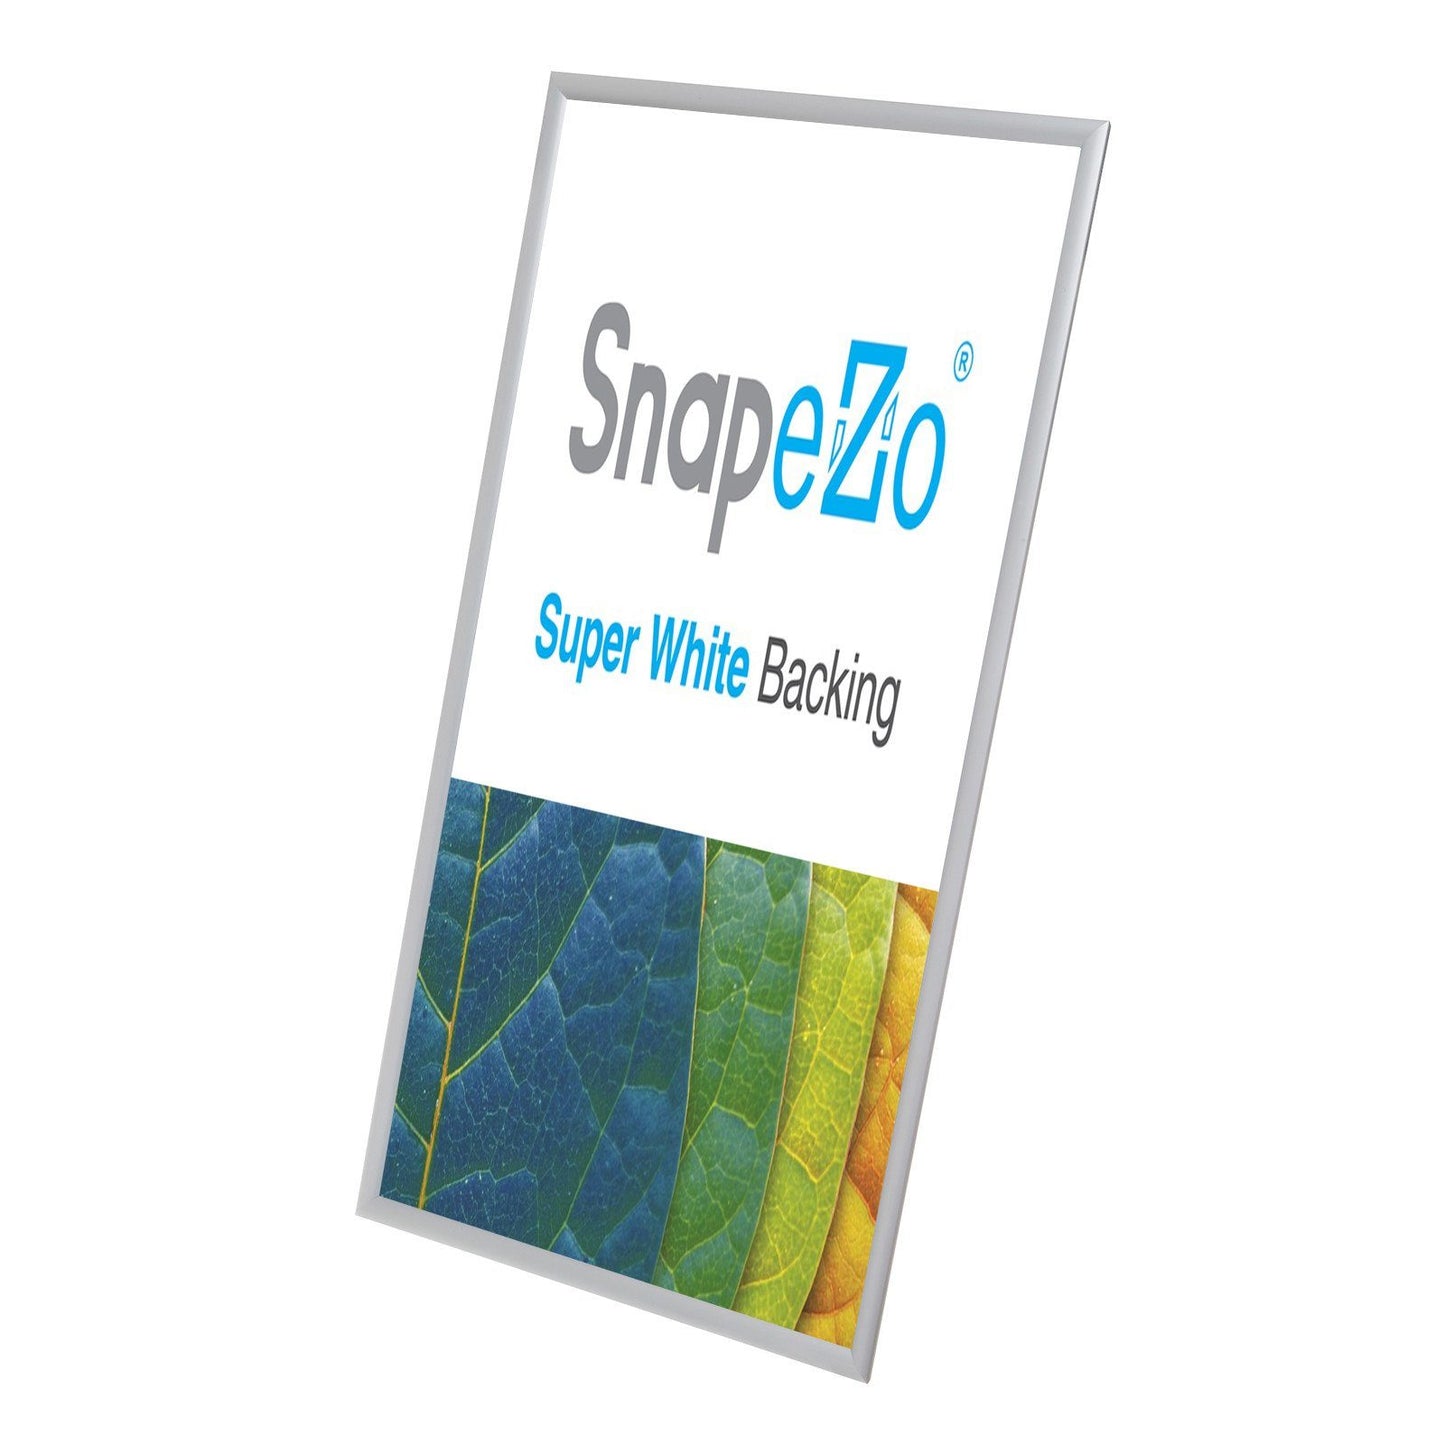 Load image into Gallery viewer, 17x38 Silver SnapeZo® Snap Frame - 1.2 Inch Profile
